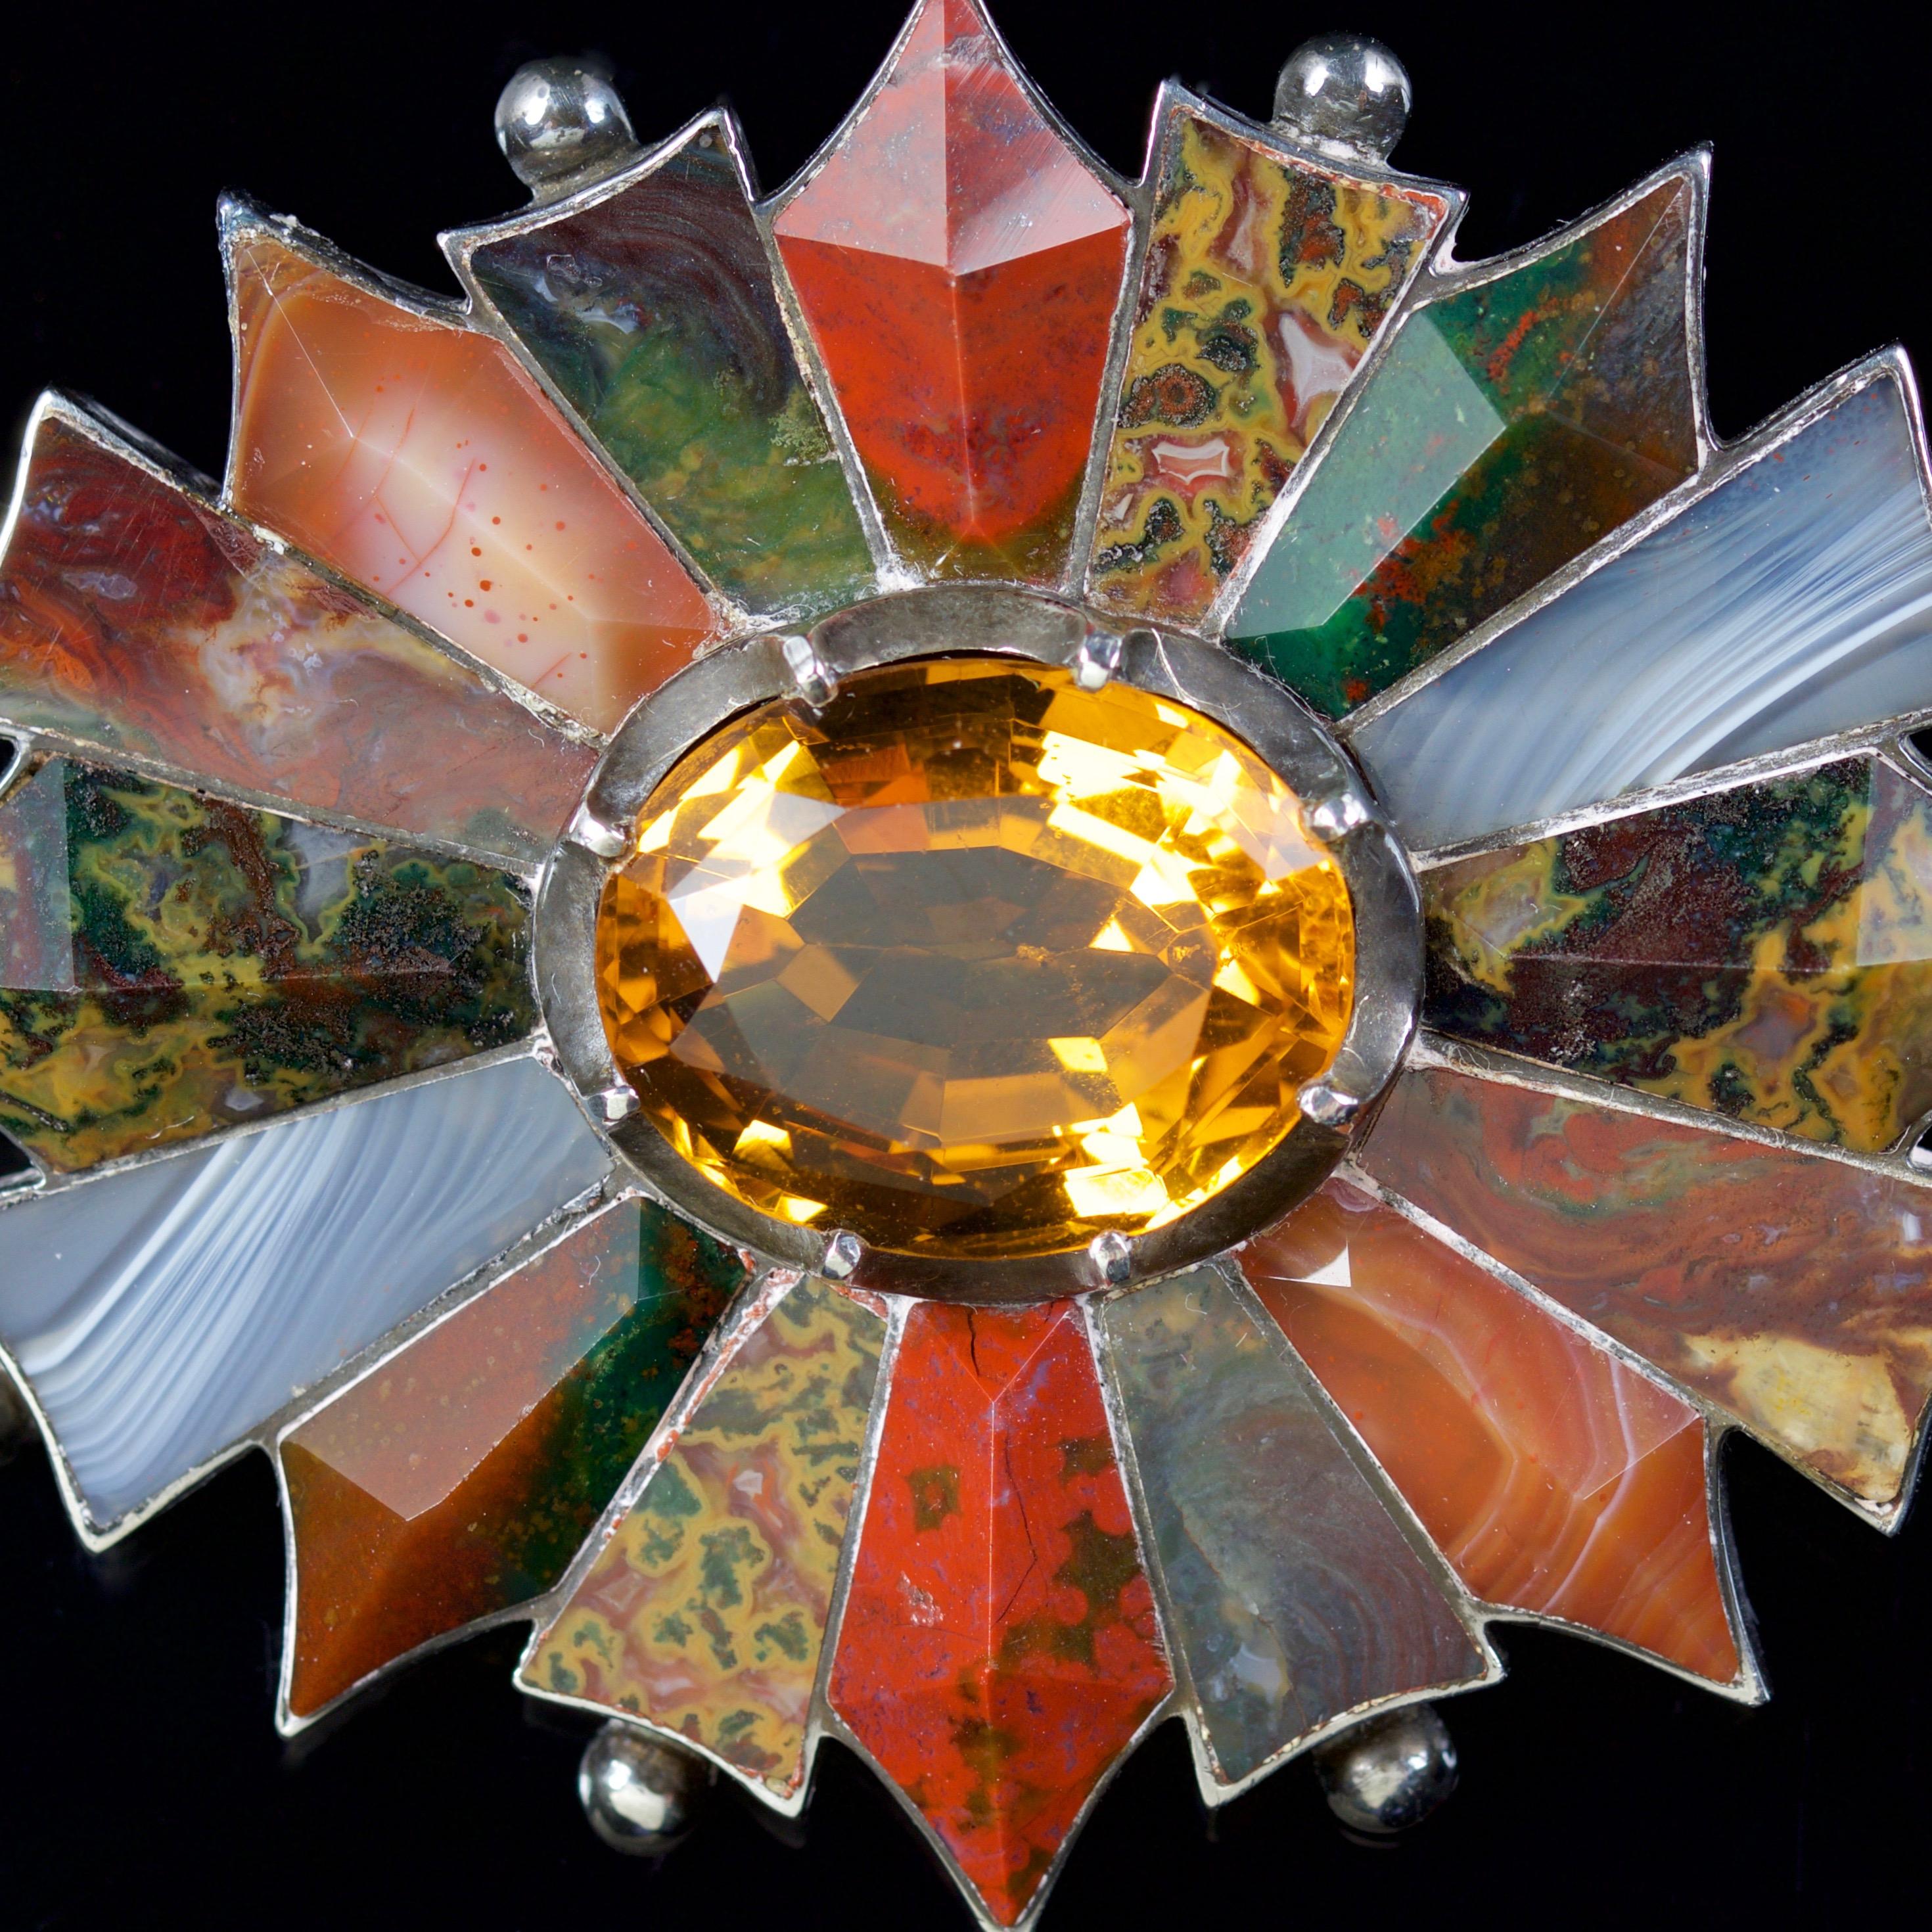 This fabulous Scottish Plaid Agate brooch is set in Sterling Silver, Circa 1860.

Scottish Jewellery was made popular by Queen Victoria as it became a souvenir of her trips to Scotland. 

The beautiful brooch is set with a 10ct Citrine in the